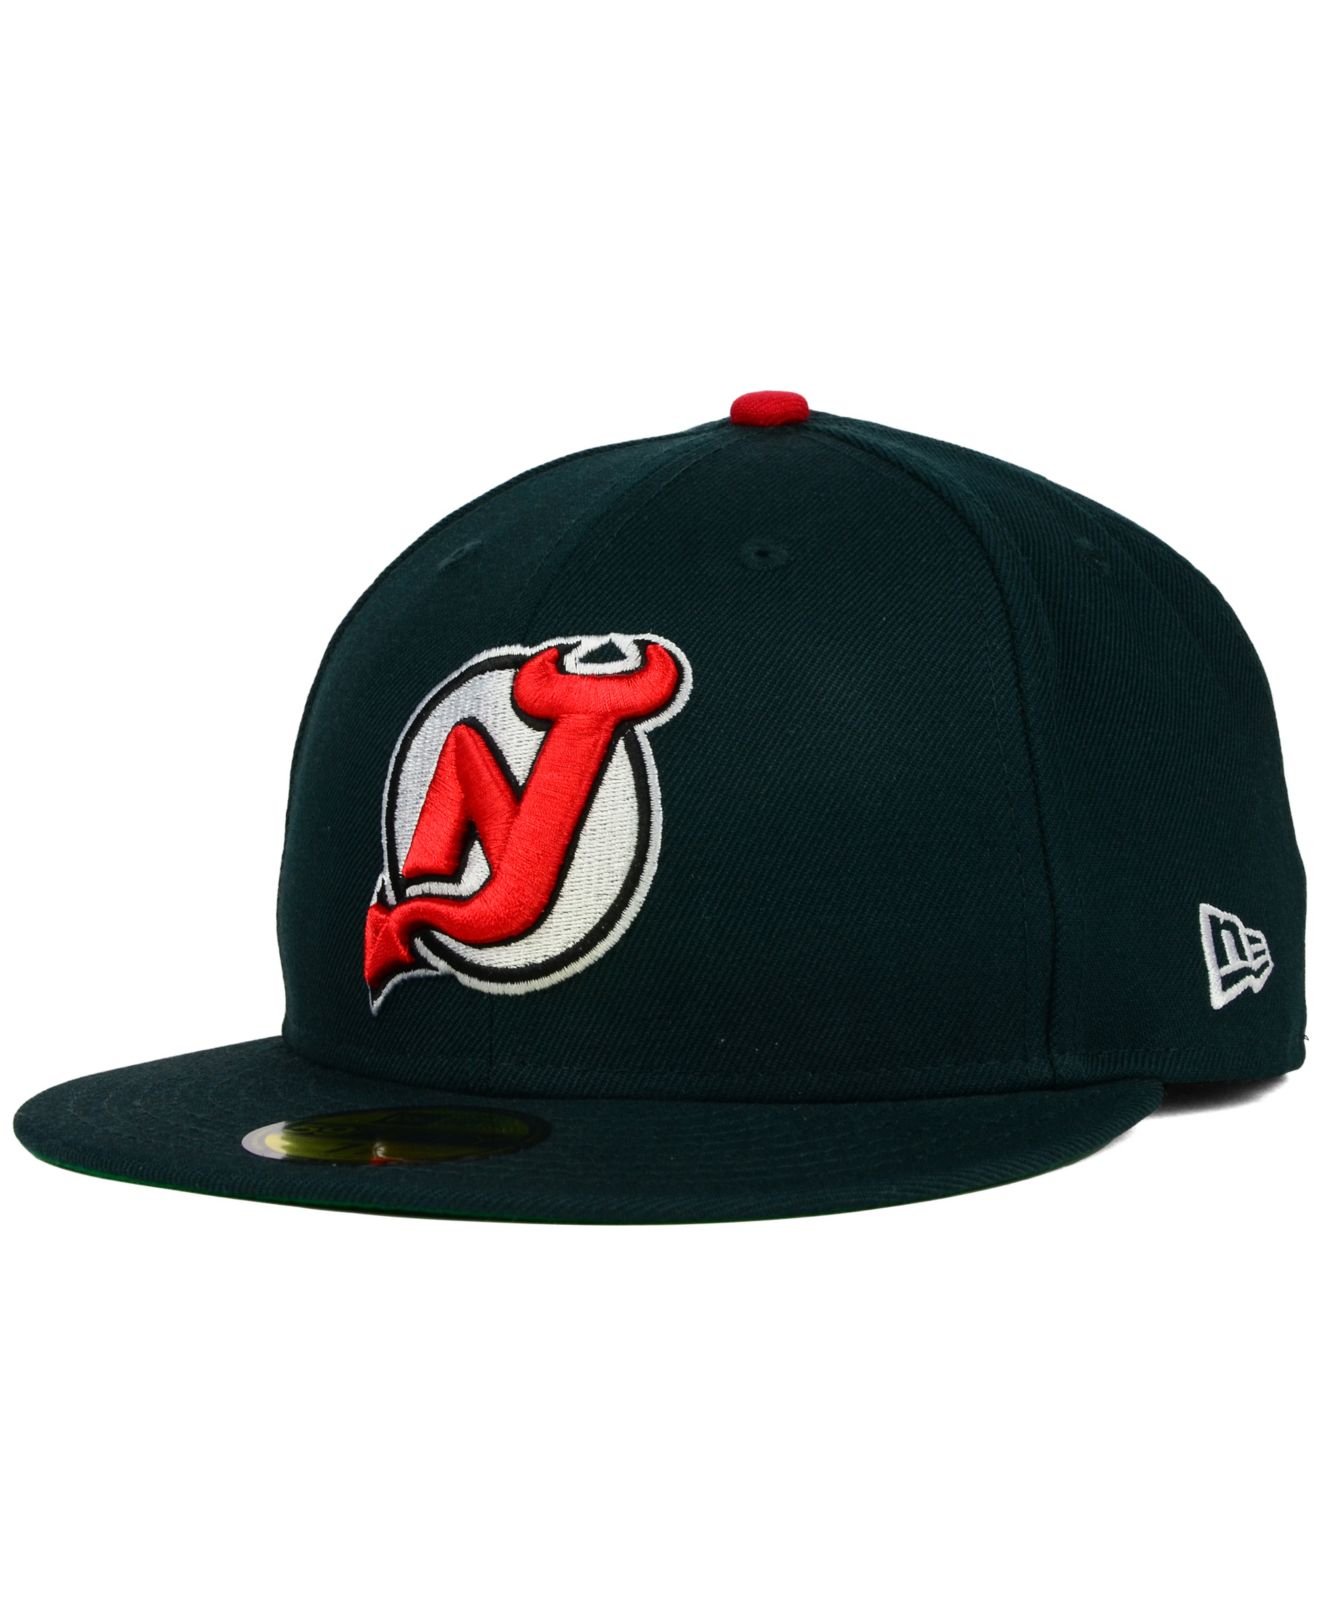 New Era 59FIFTY NJ DEVILS Hat Cap Fitted 6 3/4 Wool NHL New Jersey 5950 NOS